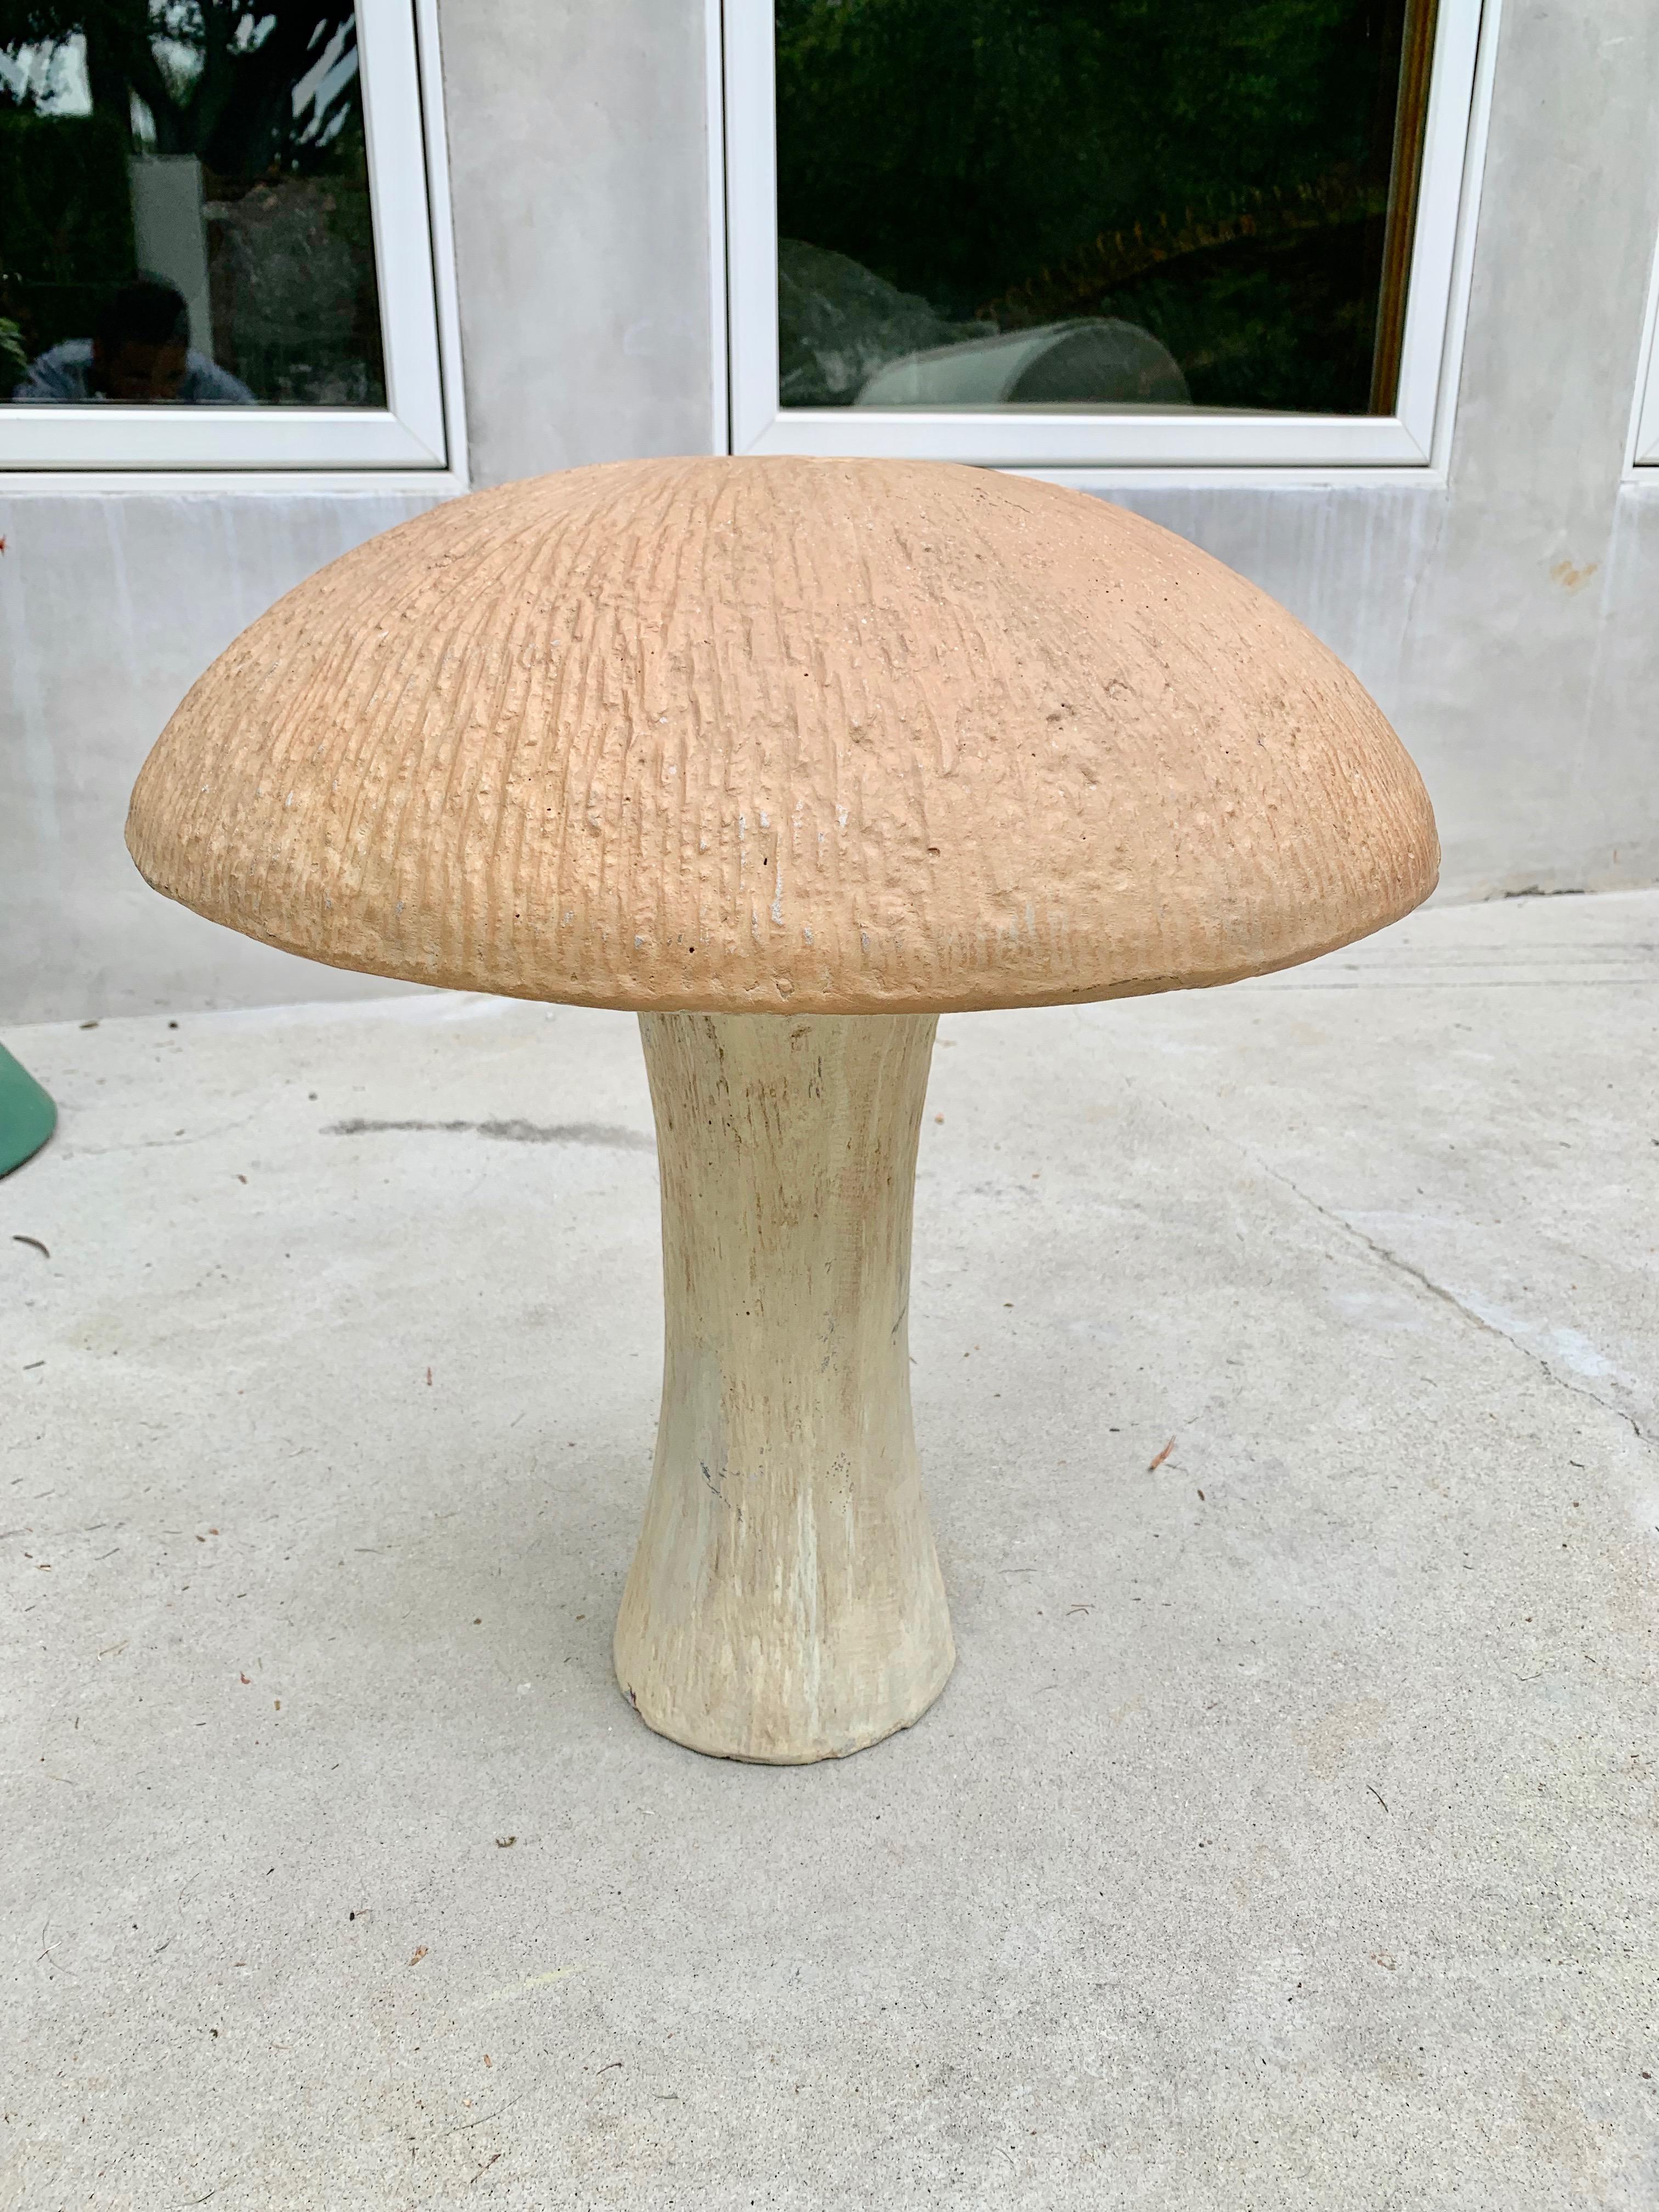 Large concrete mushroom sculpture from the 1970s. Light colored stalk with brown top. Can be used as a stool in the garden or placed inside or out as sculpture. Good vintage condition and coloring.